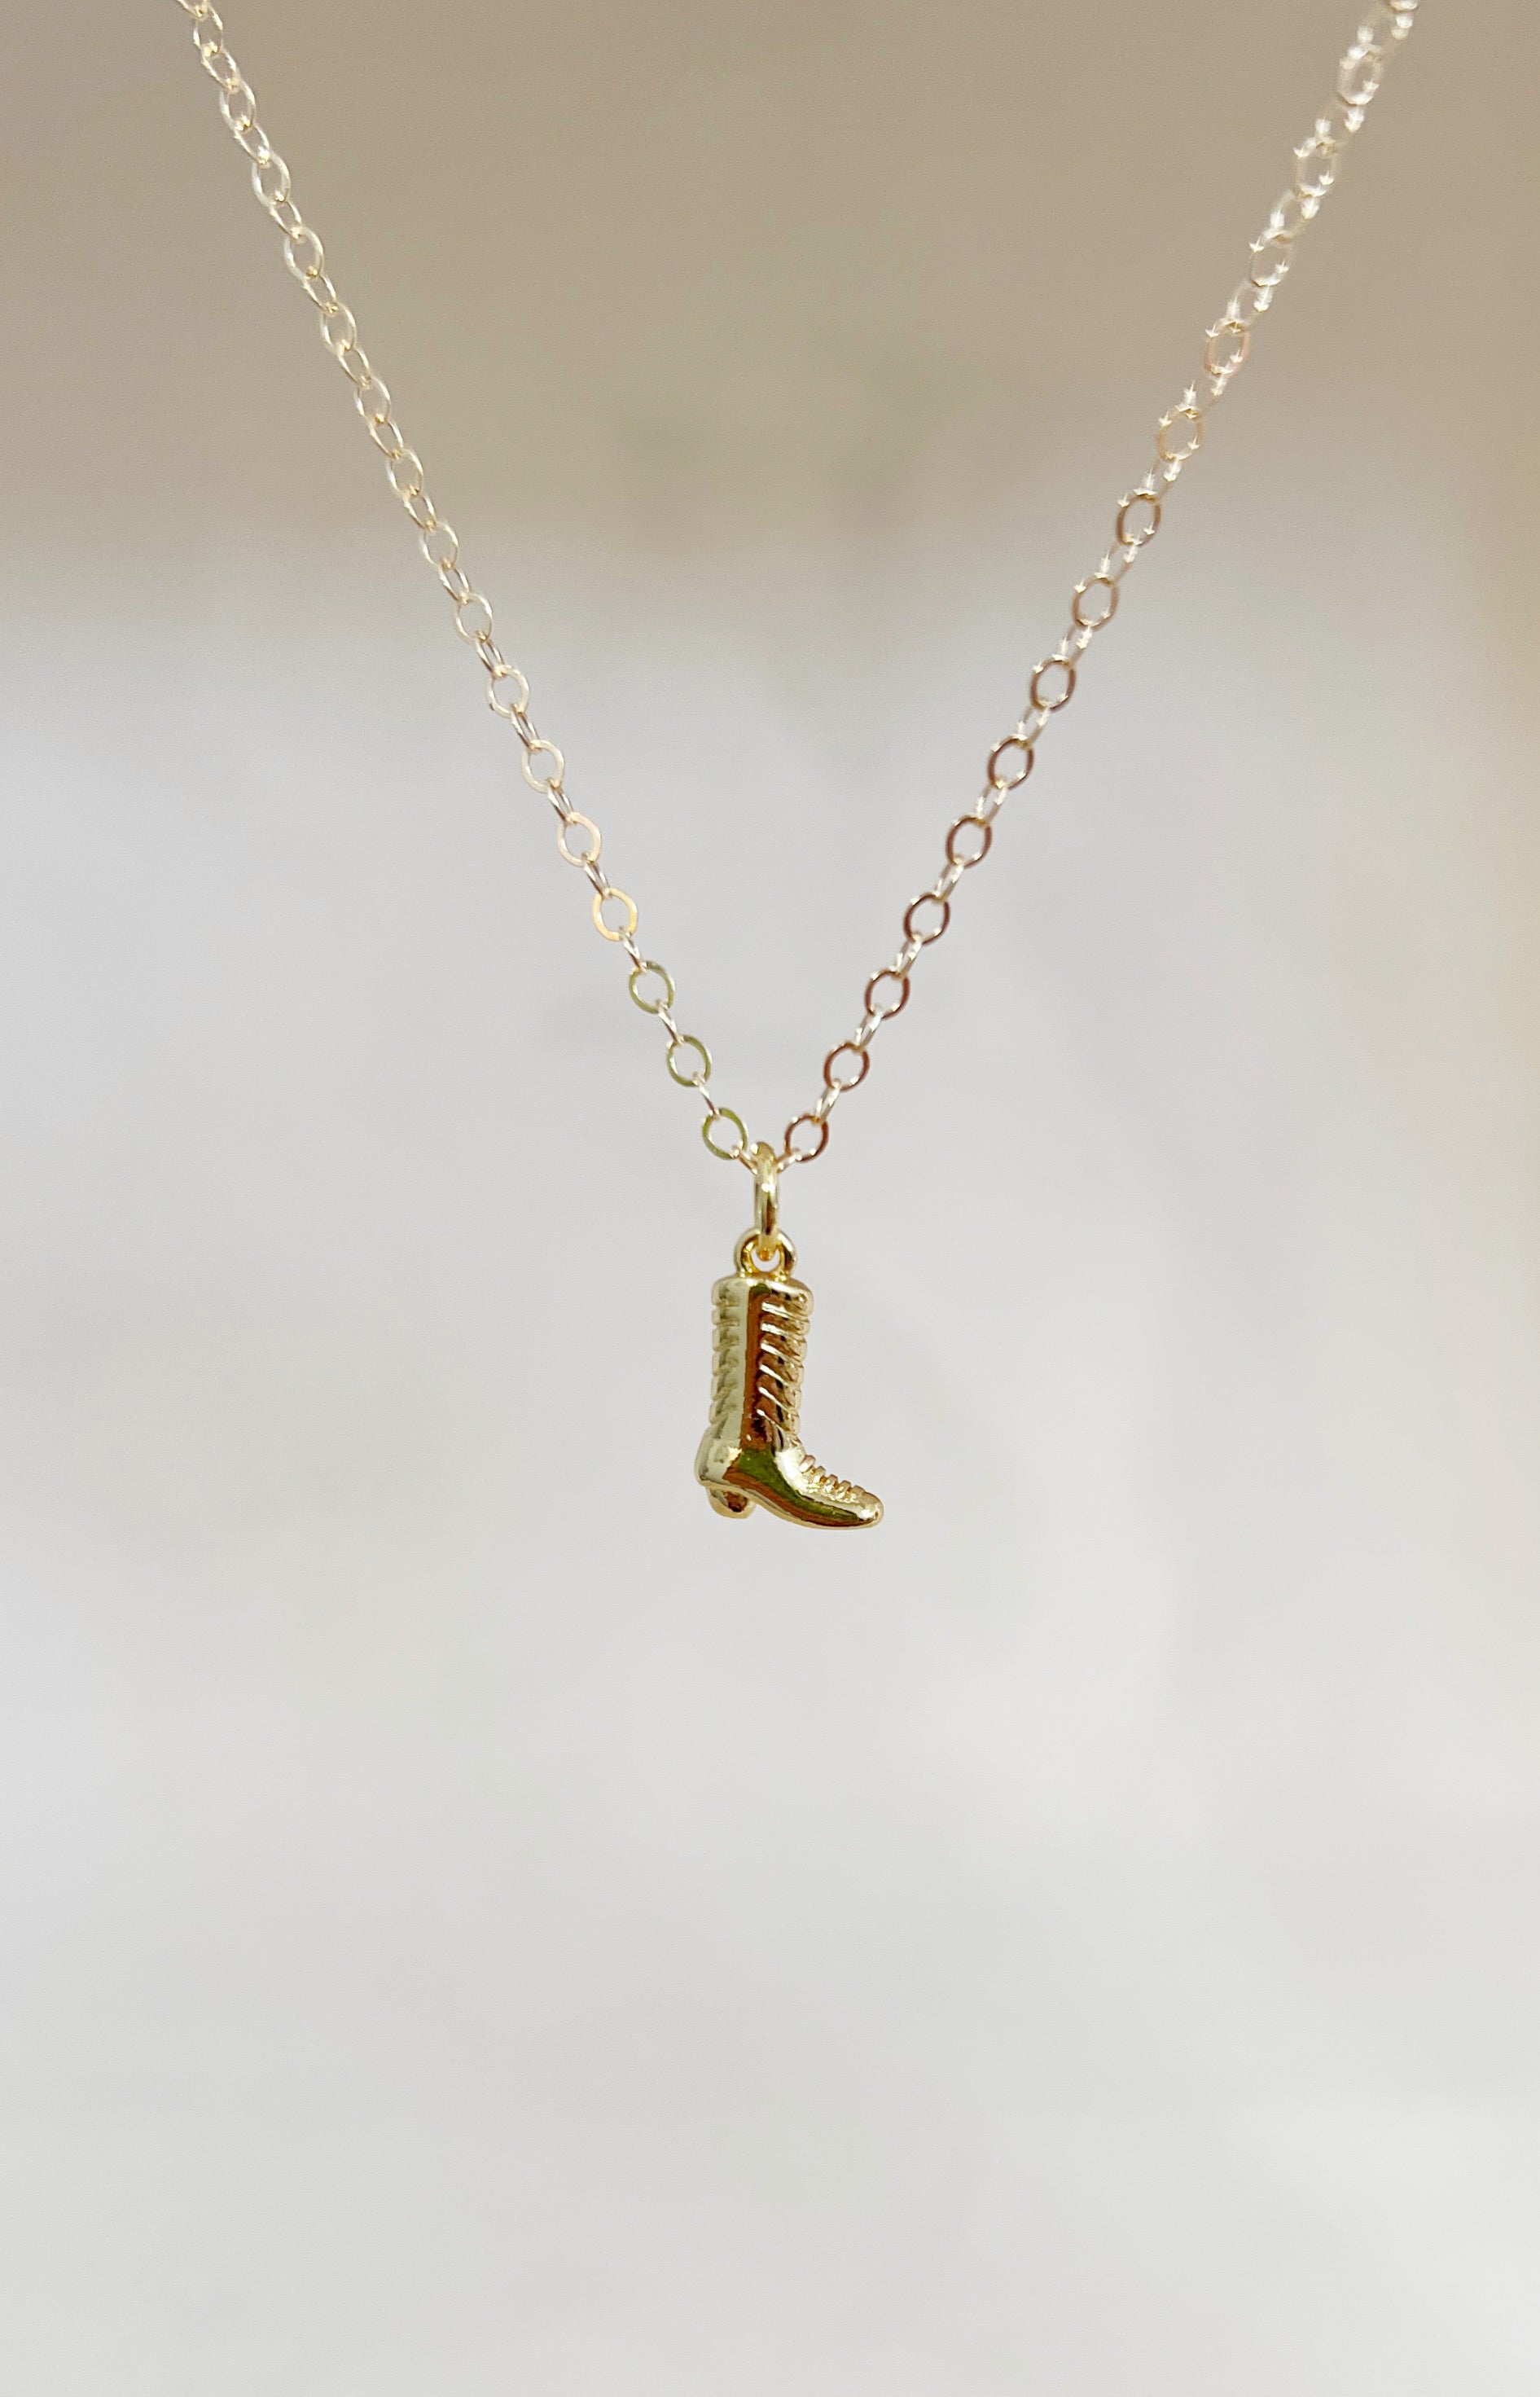 Cowboy Boot Necklace | 18k gold-filled